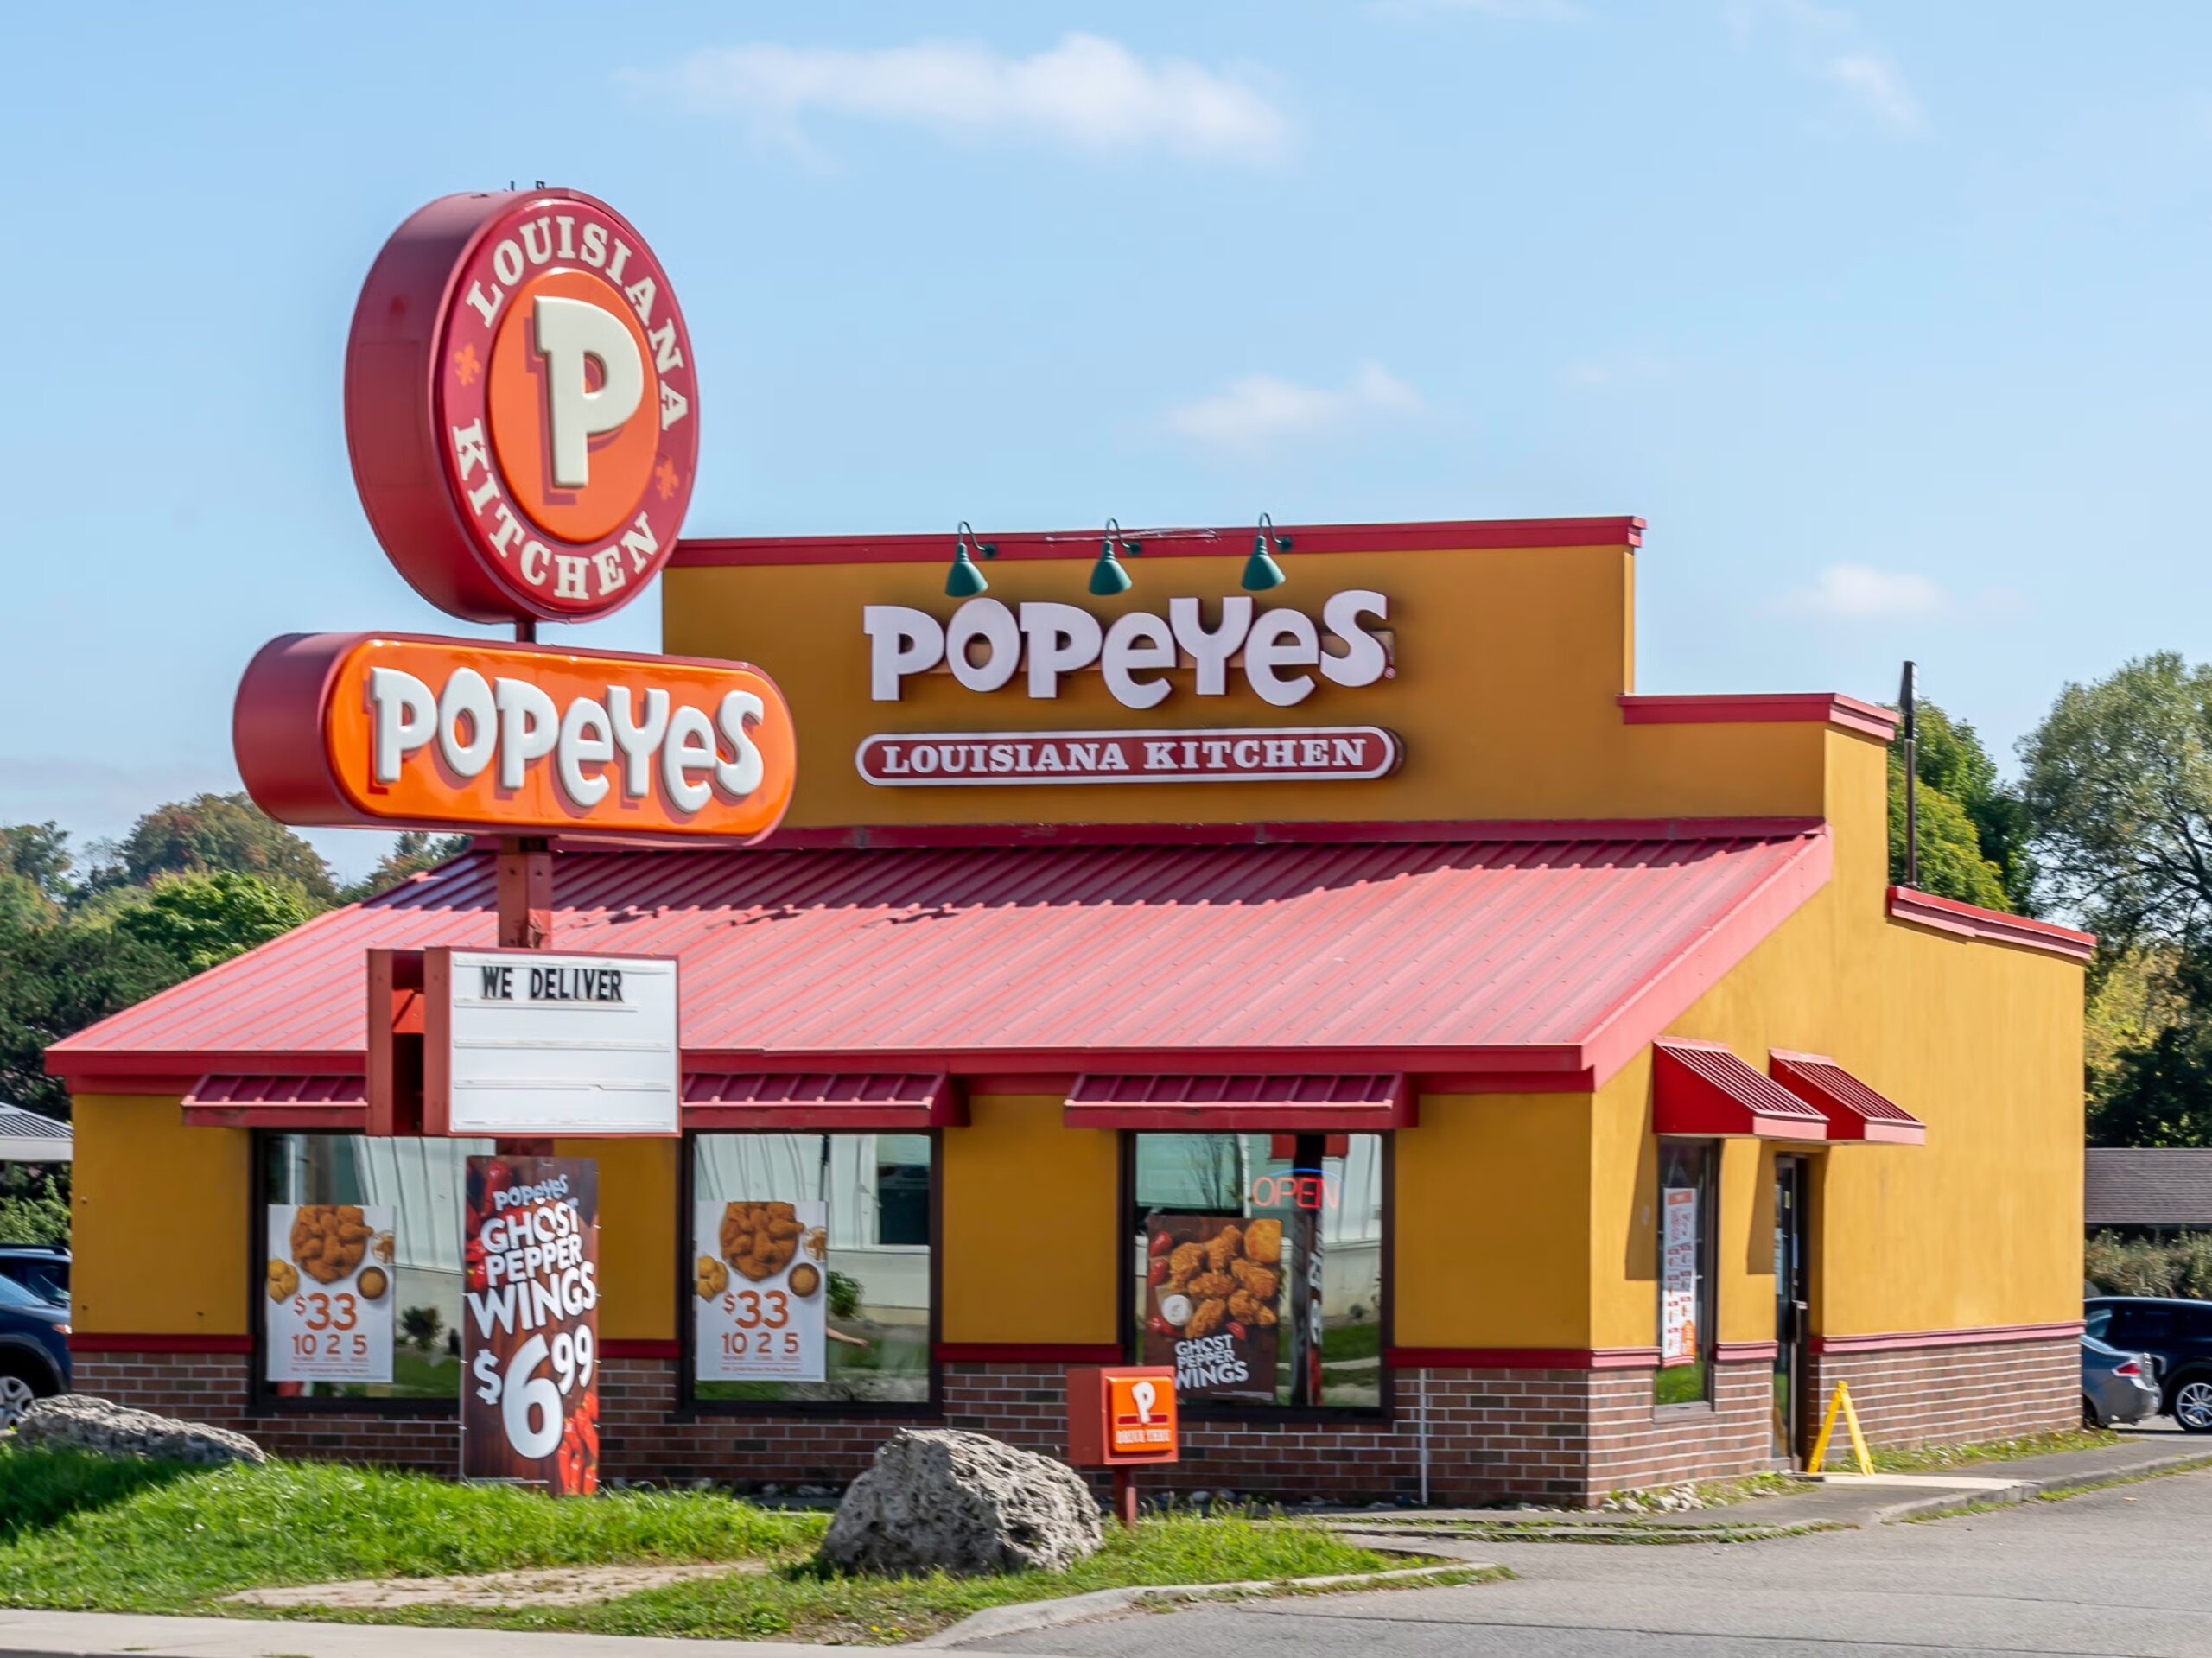 What Time Does Popeyes Open?